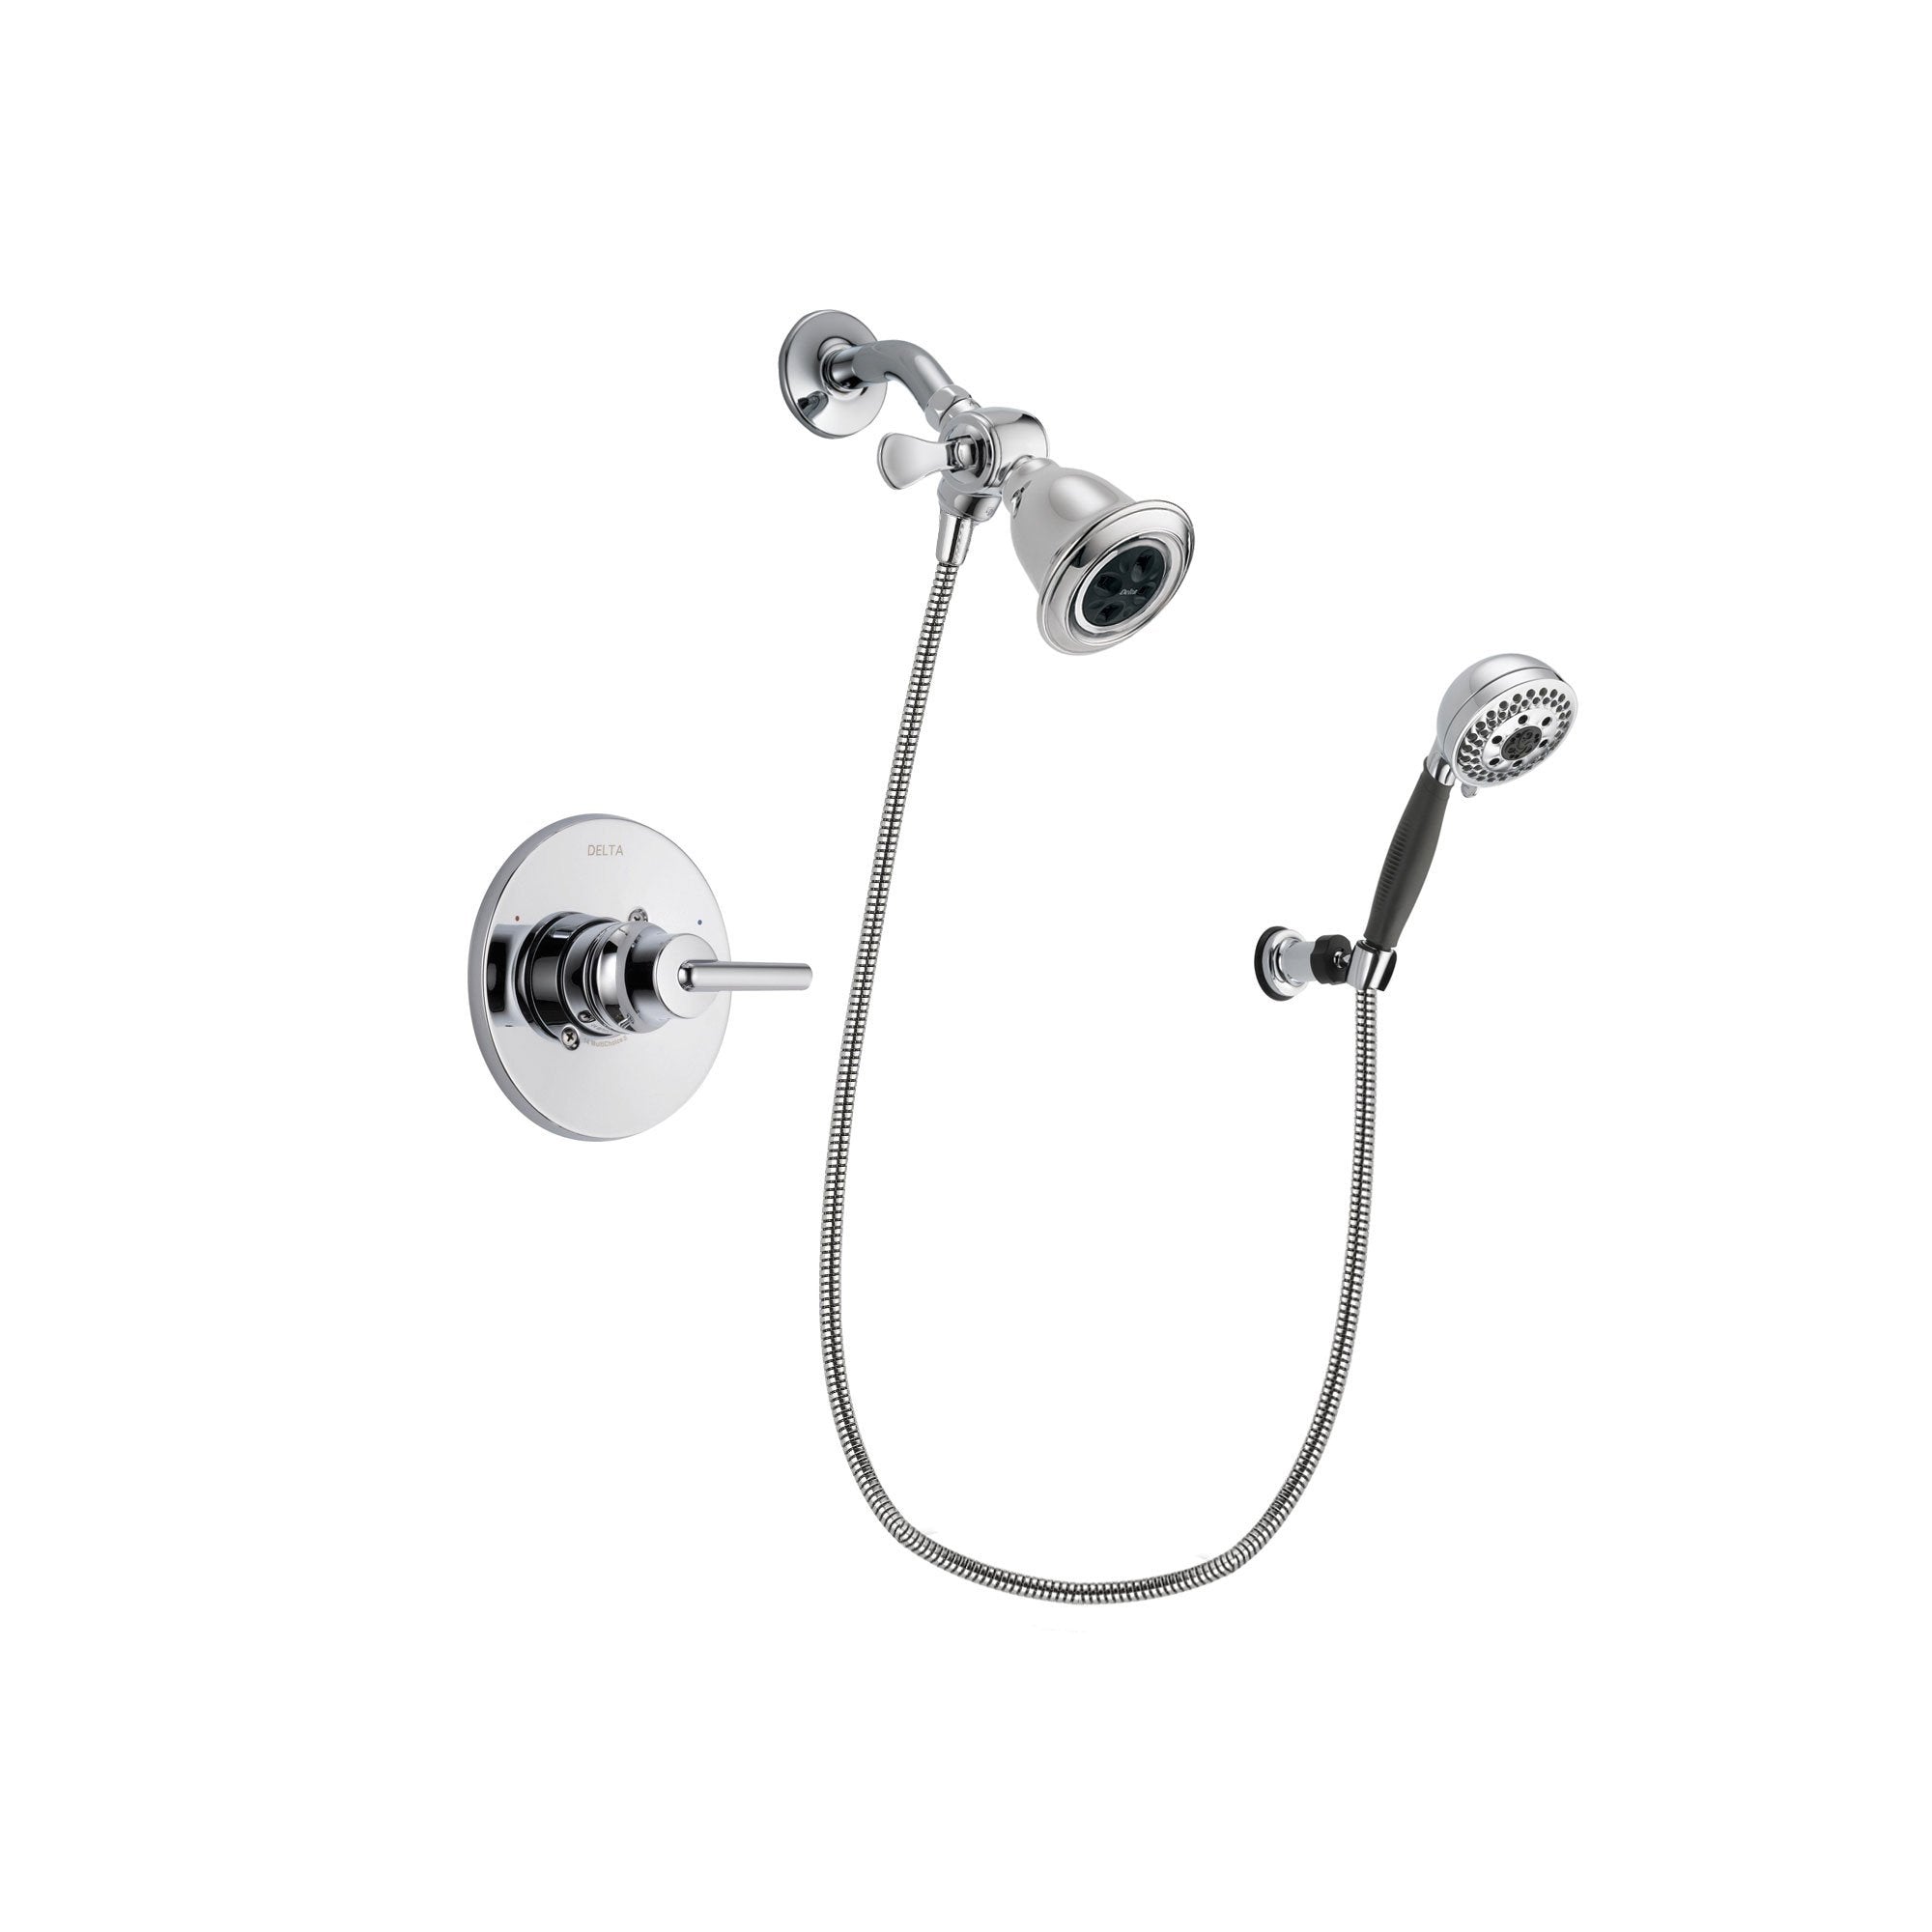 Delta Trinsic Chrome Shower Faucet System w/ Showerhead and Hand Shower DSP1152V